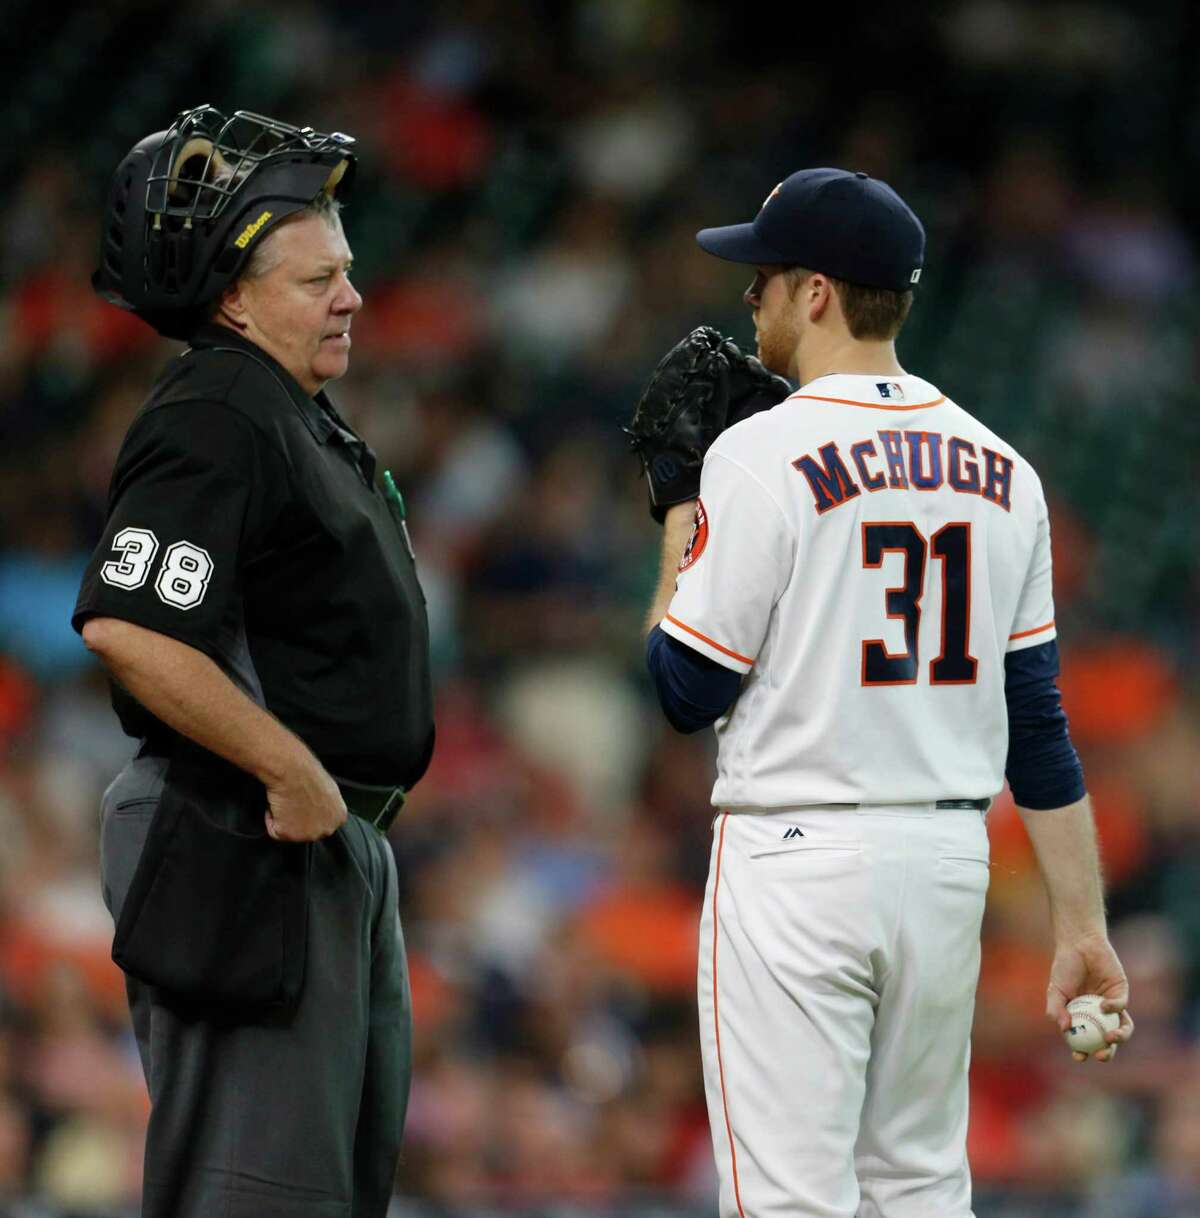 Houston Astros starting pitcher Collin McHugh (31) talks to home plate umpire Gary Cederstrom after Los Angeles Angels right fielder Kole Calhoun (56) singled during the third inning of an MLB baseball game at Minute Maid Park, Tuesday, June 21, 2016, in Houston.